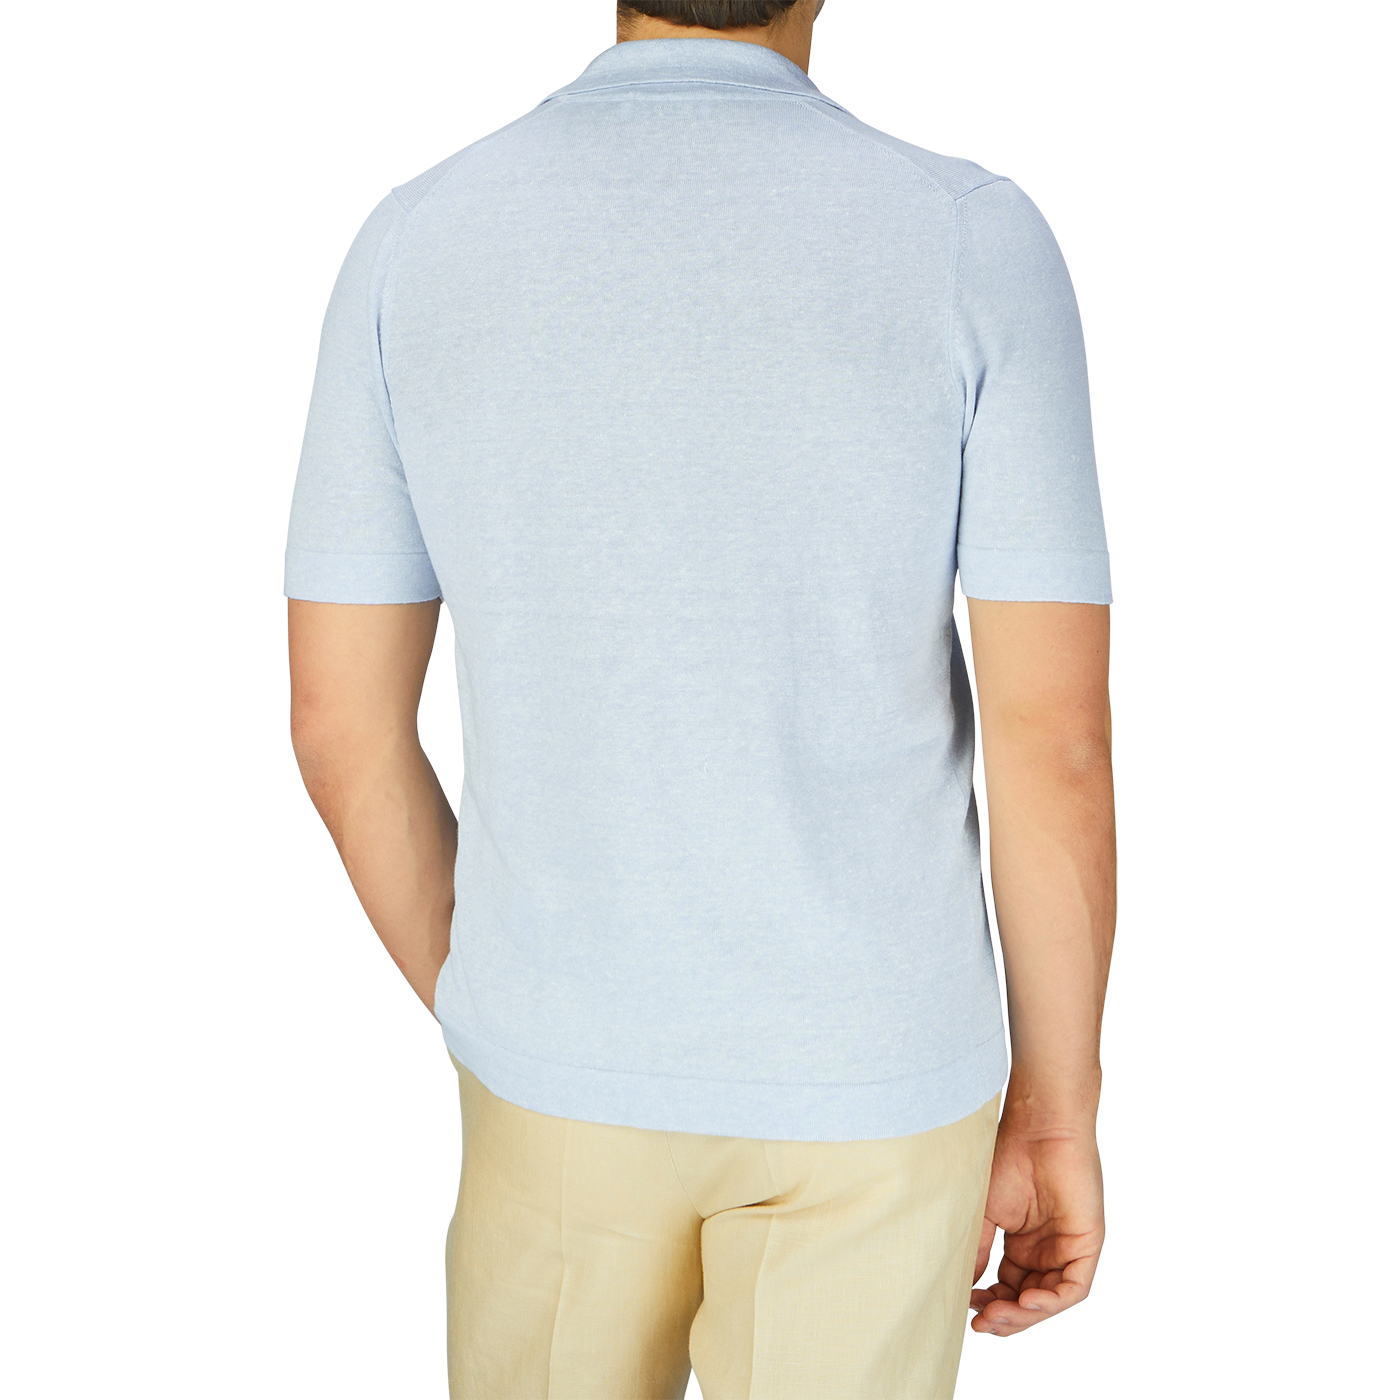 The back view of a man wearing a Gran Sasso Light Blue Linen Cotton Bowling Shirt and tan pants.